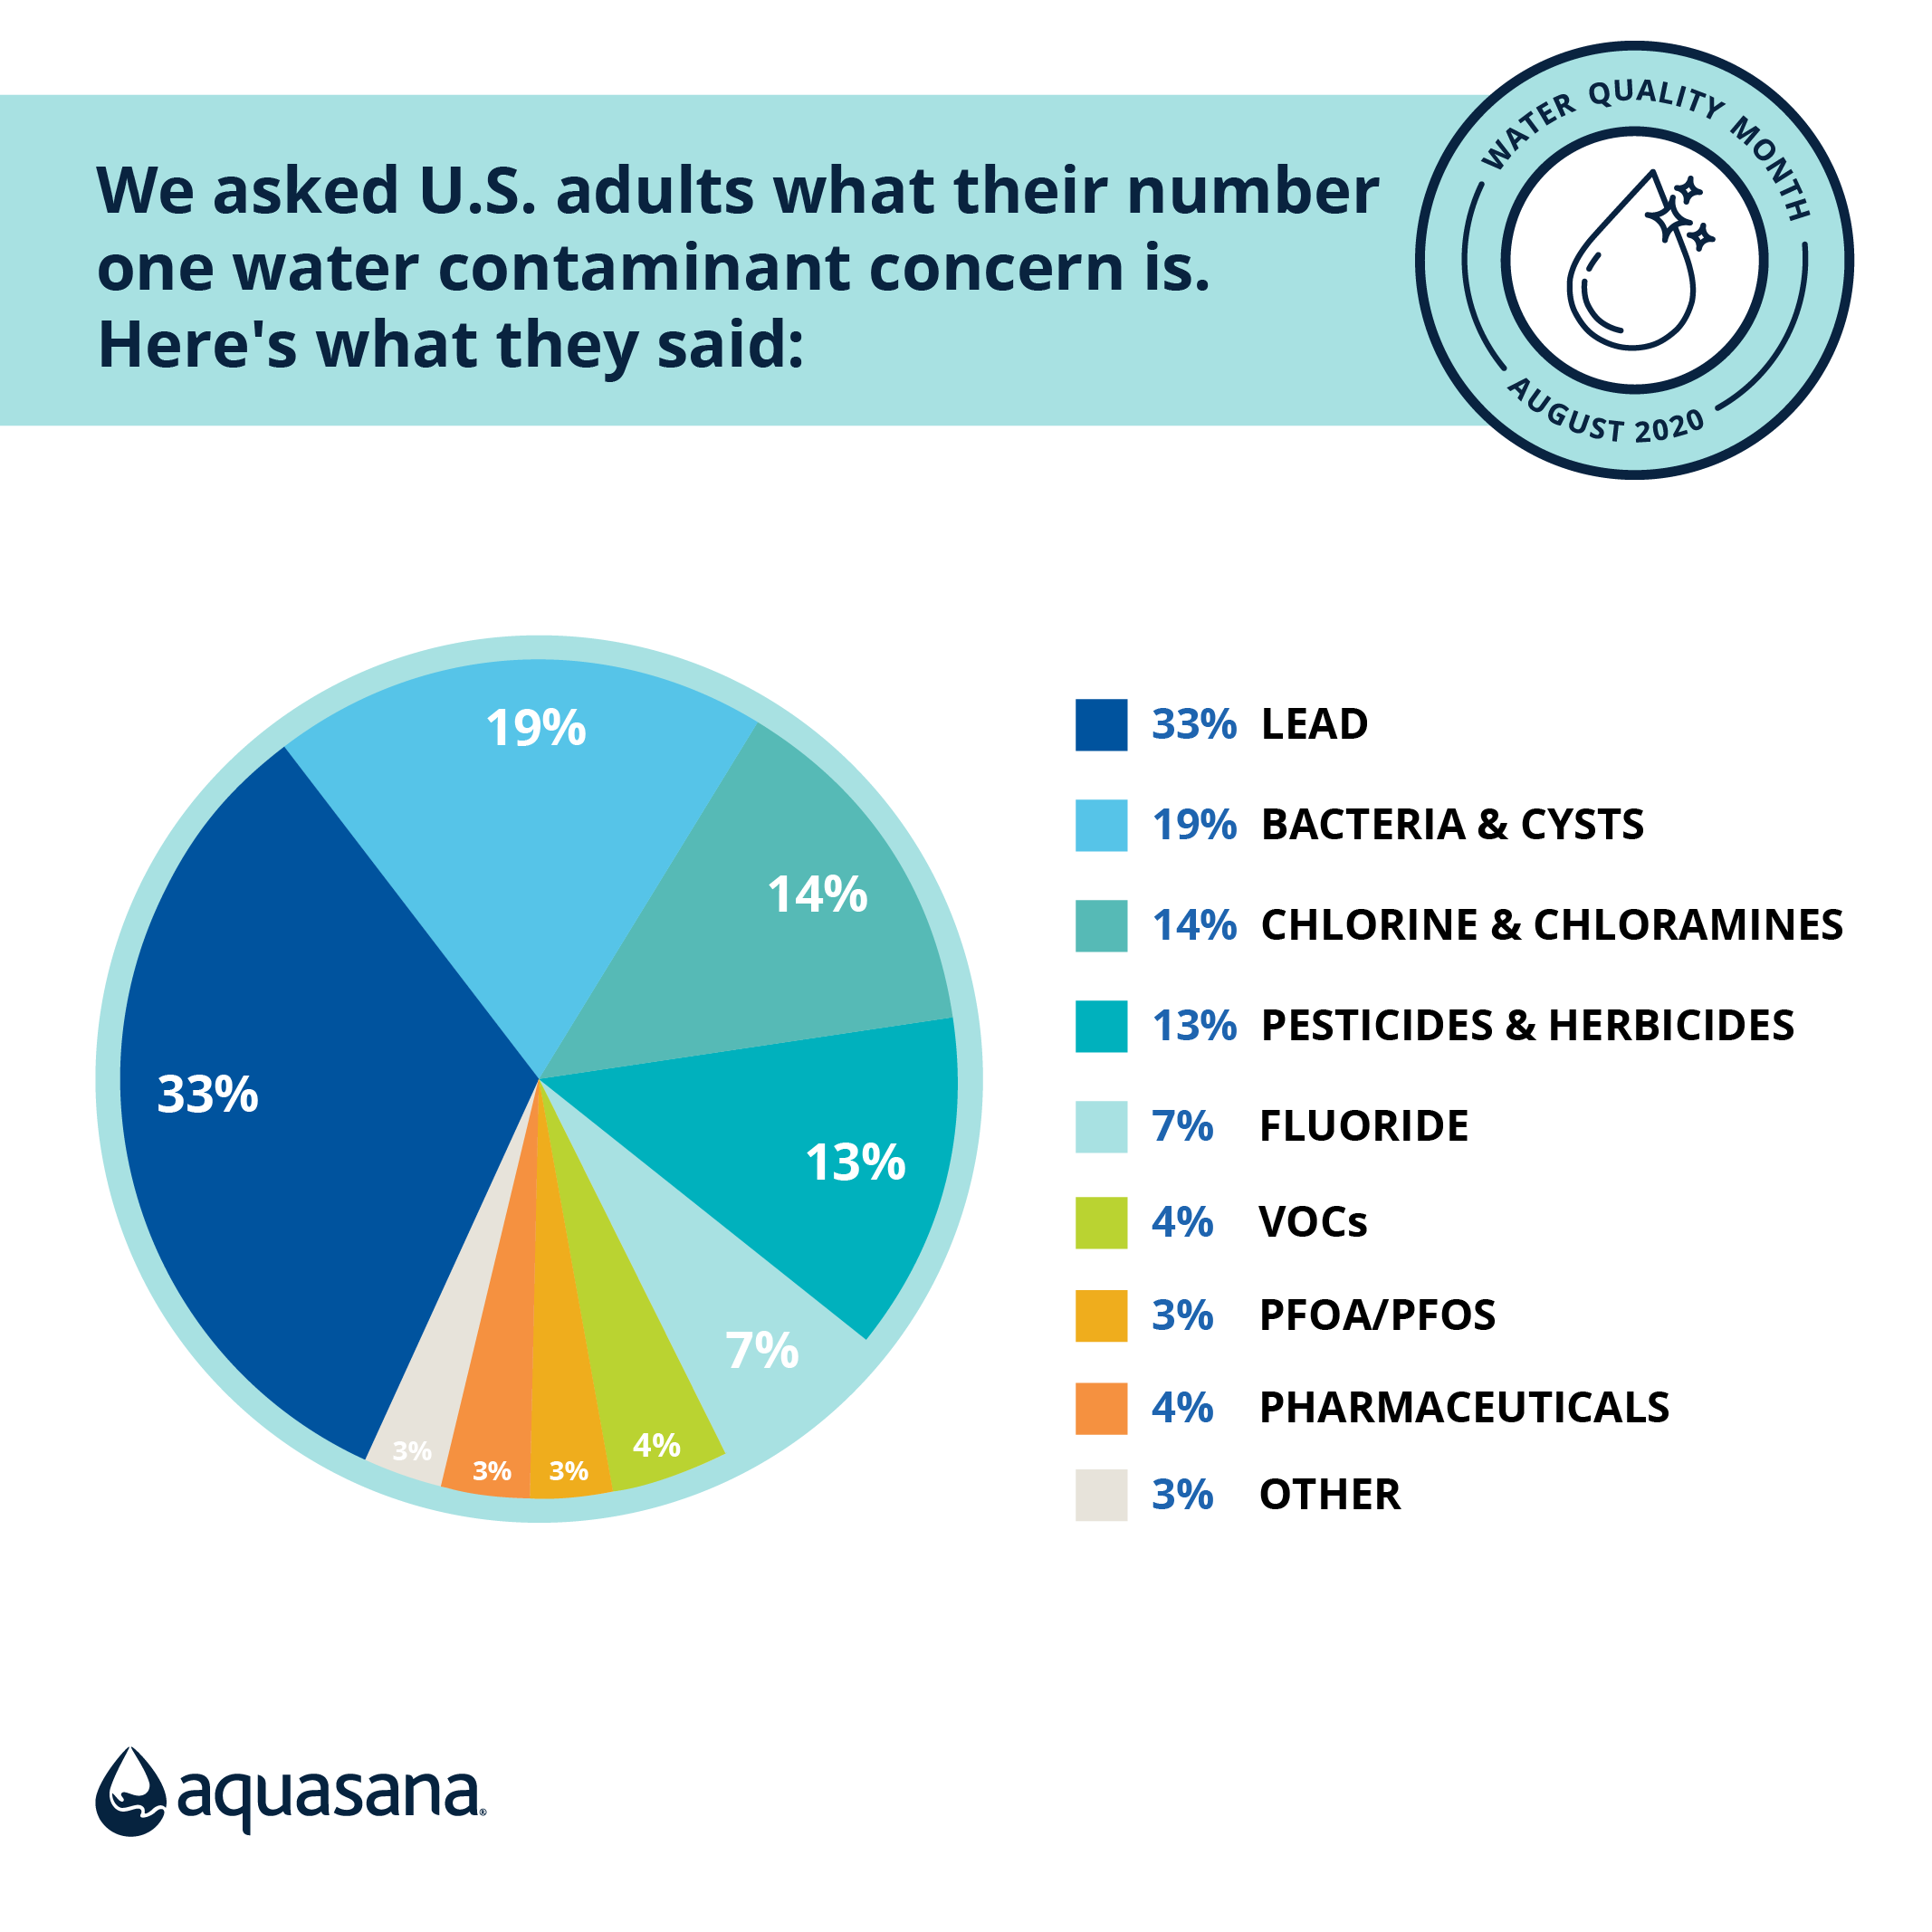 One in three U.S. adults chose lead as their primary drinking water contaminant concern.